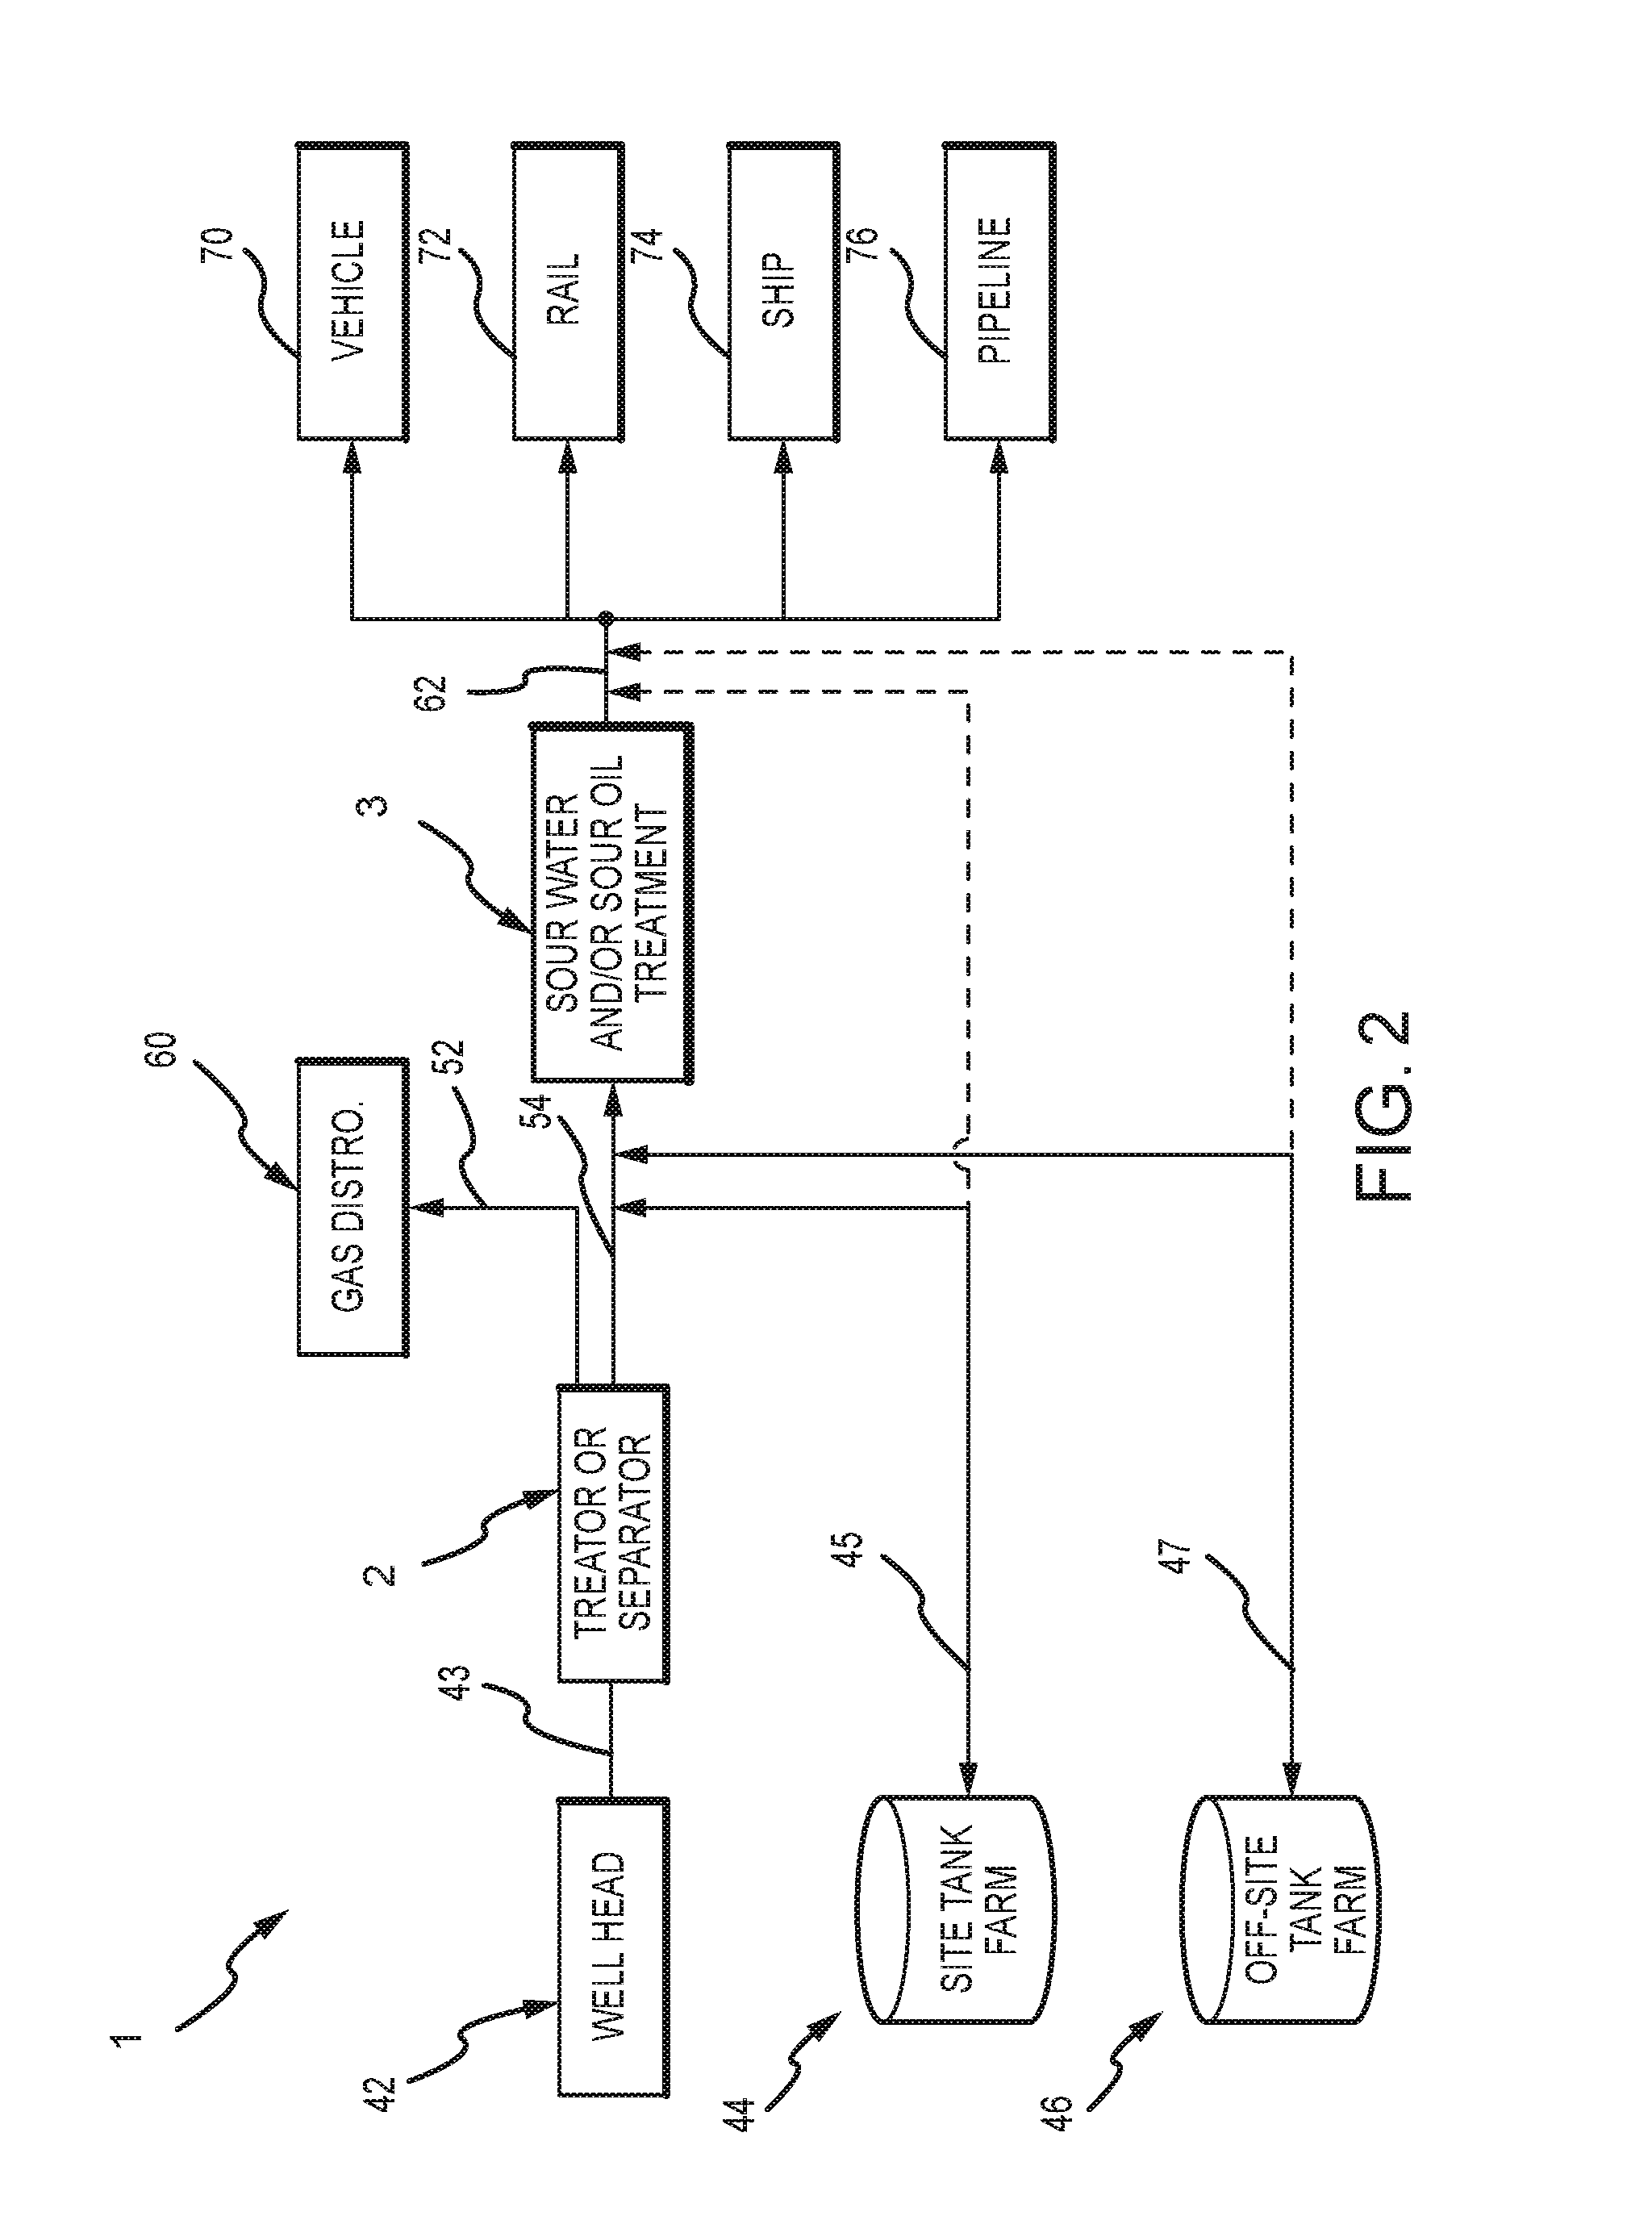 Method and System for Removing Hydrogen Sulfide from Sour Oil and Sour Water